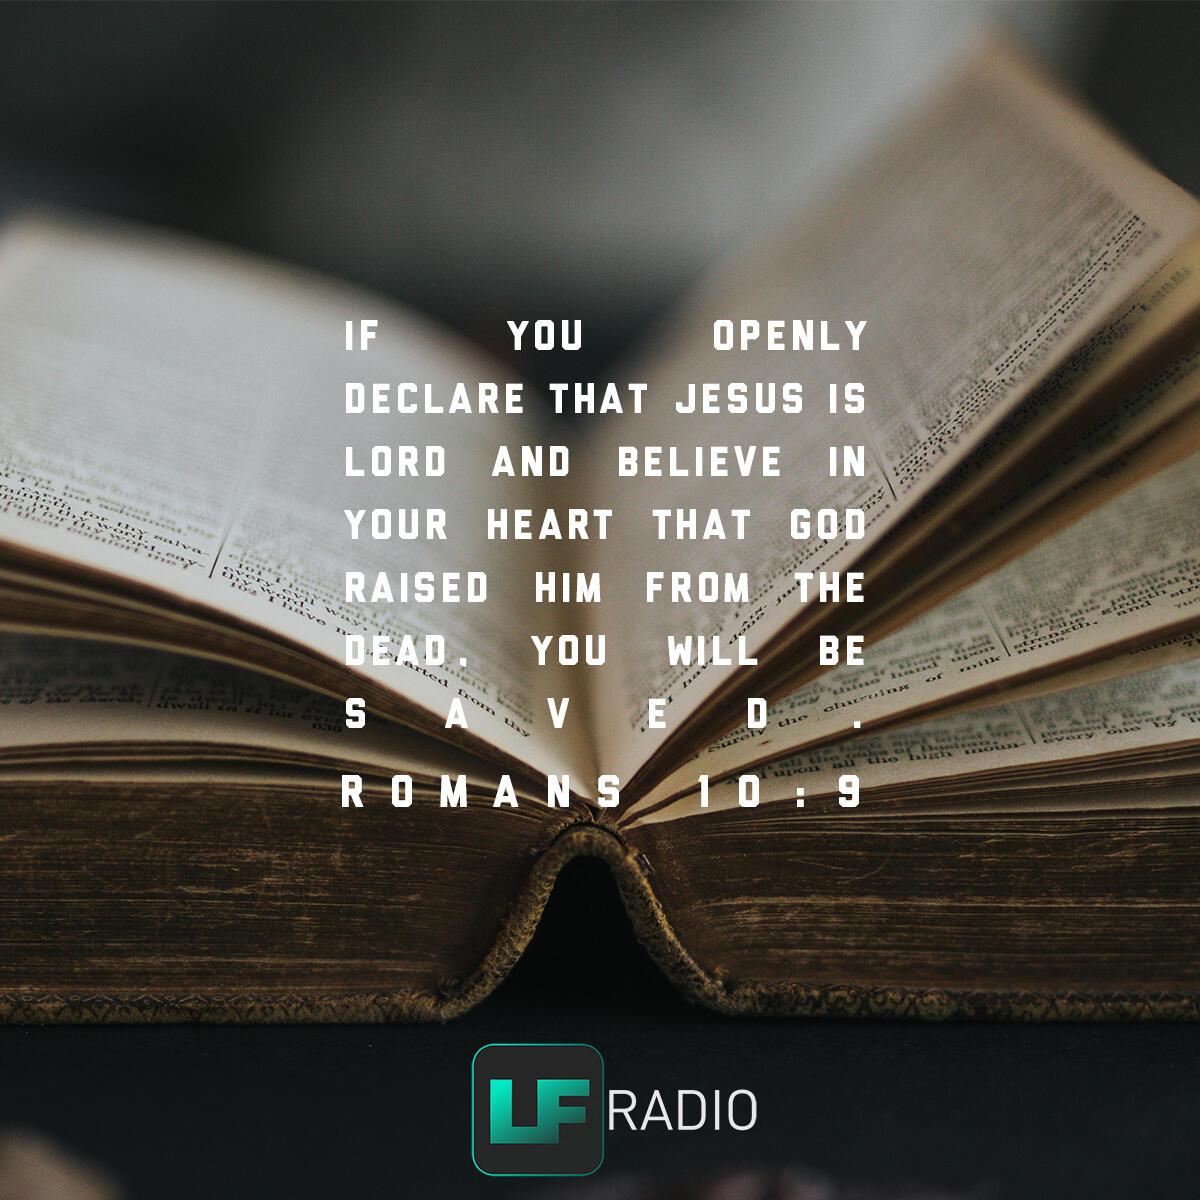 Romans 10:9 - Verse of the Day